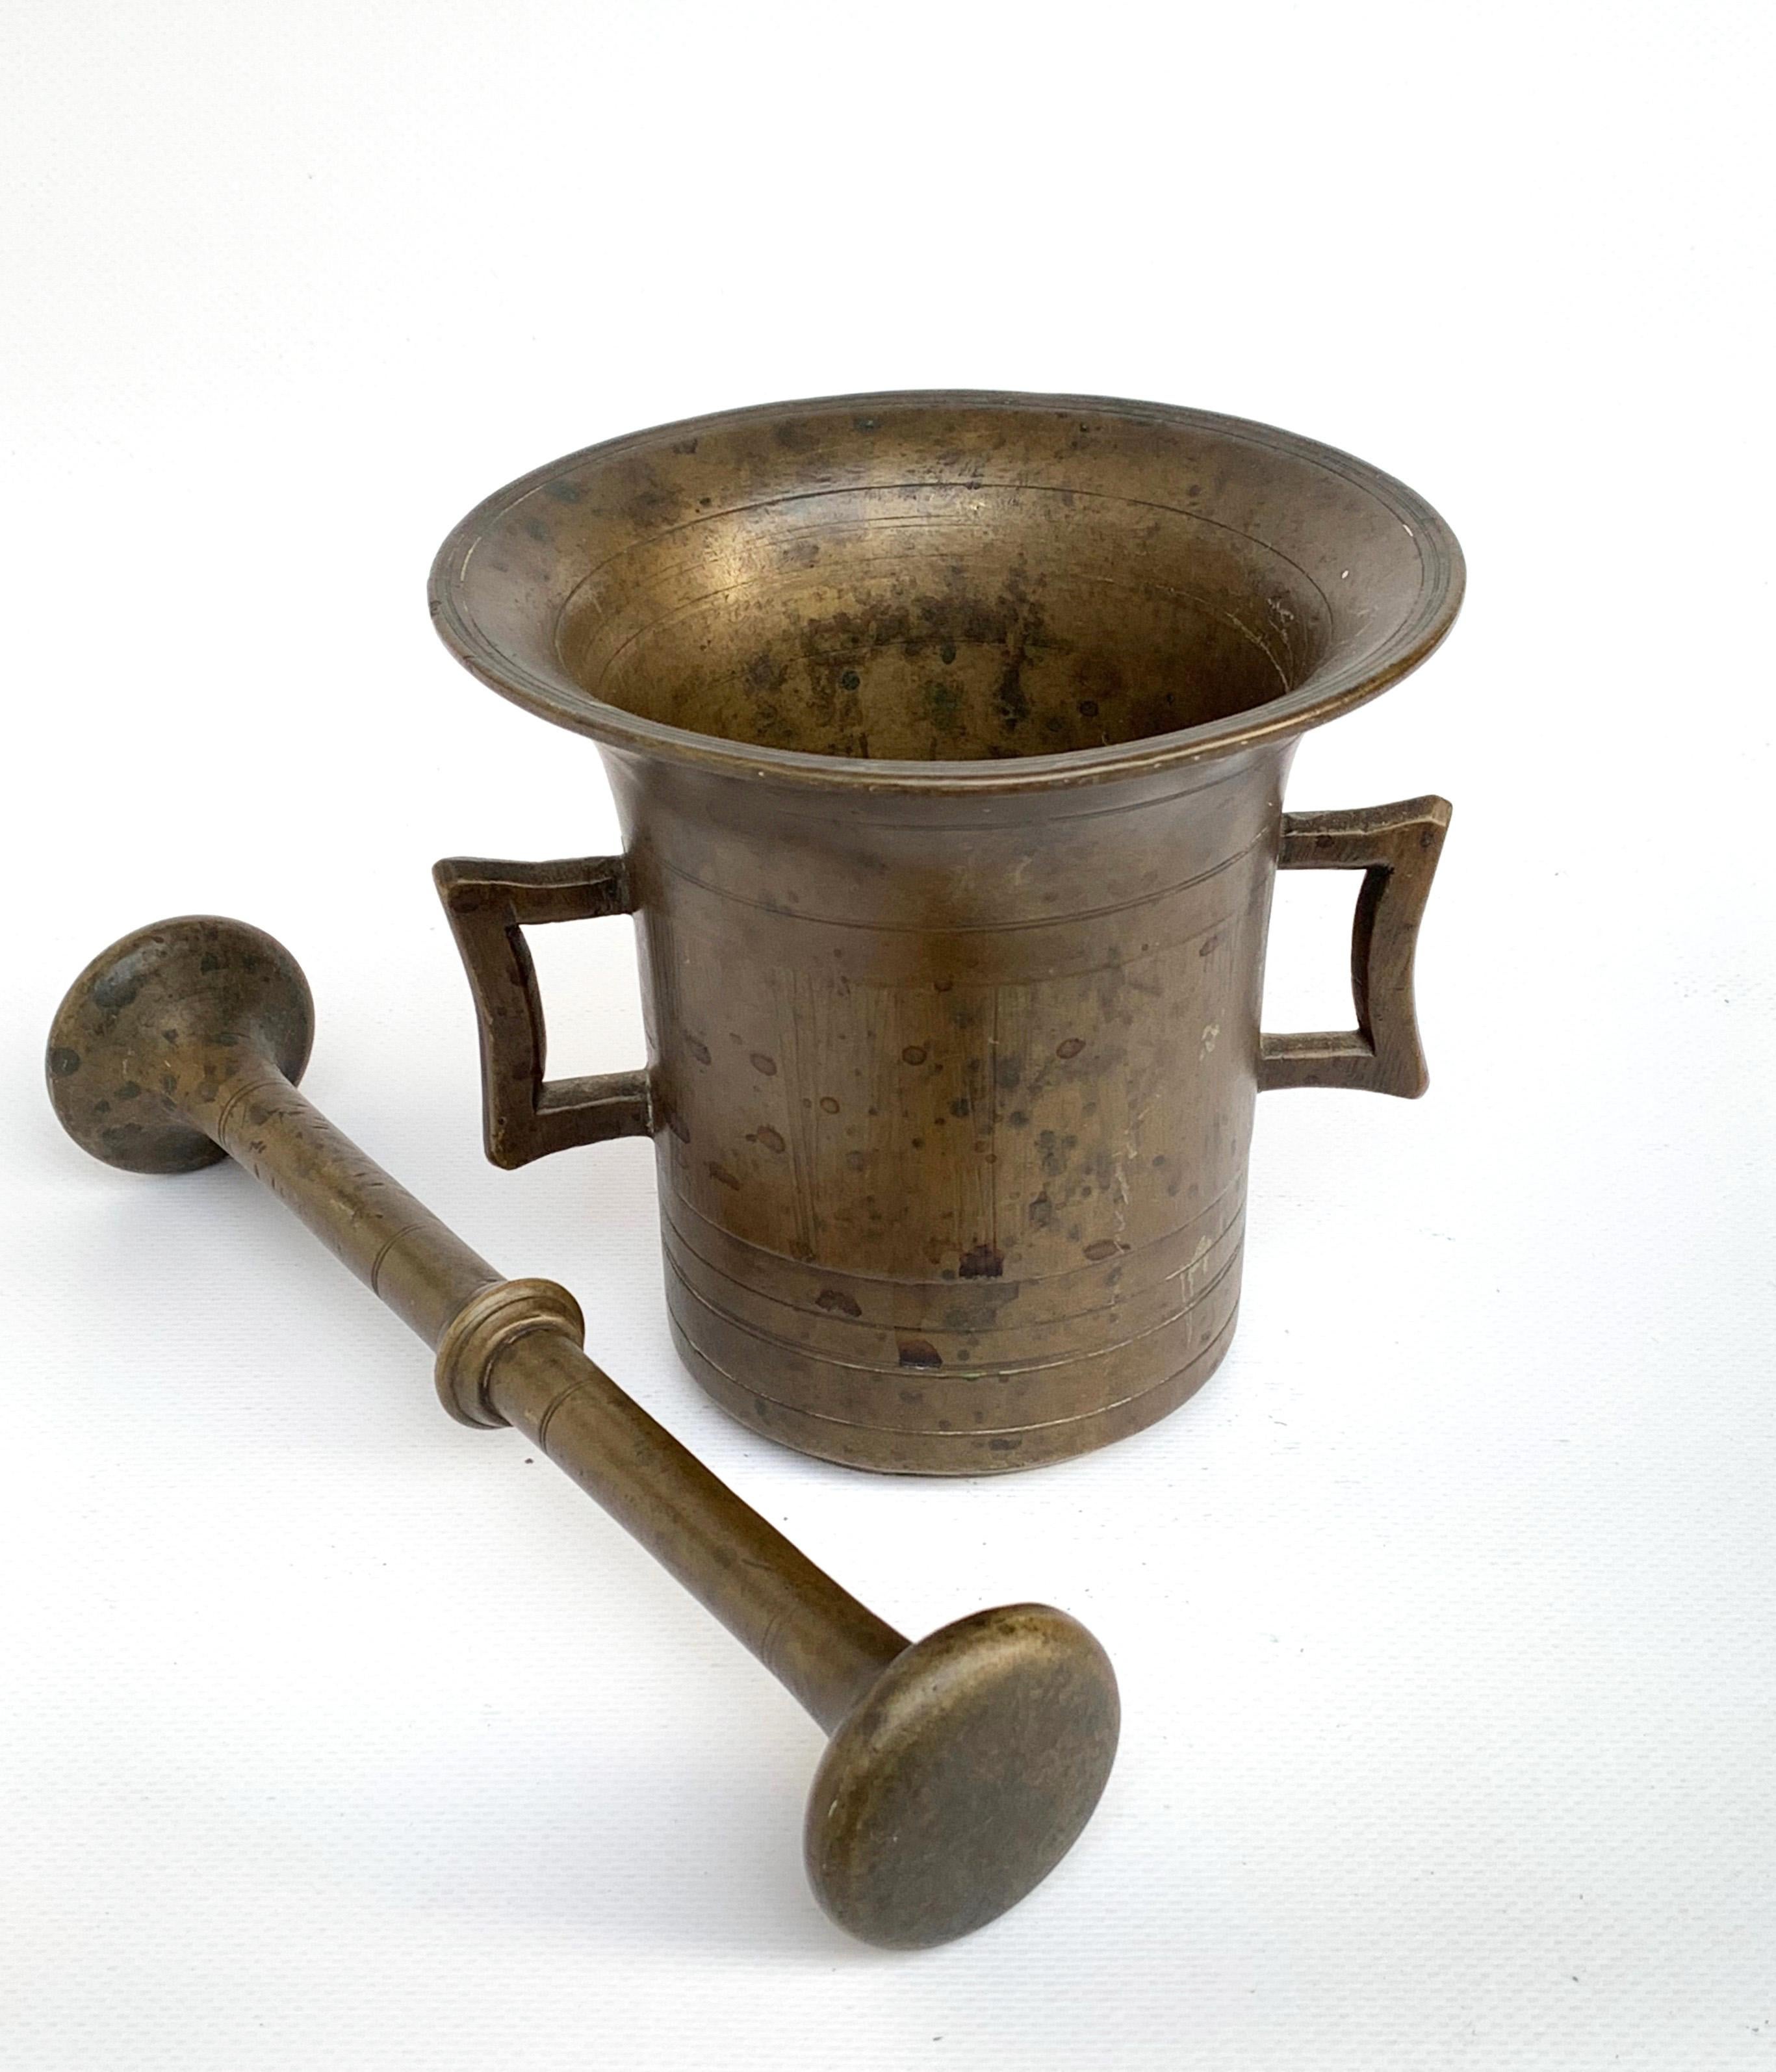 Antique bronze mortar. Handmade with pestle. Original patina.
Mortar from pharmacy or herbalist

Italian bronze mortar and pestle
Measures: Pestle height 8.85 in.